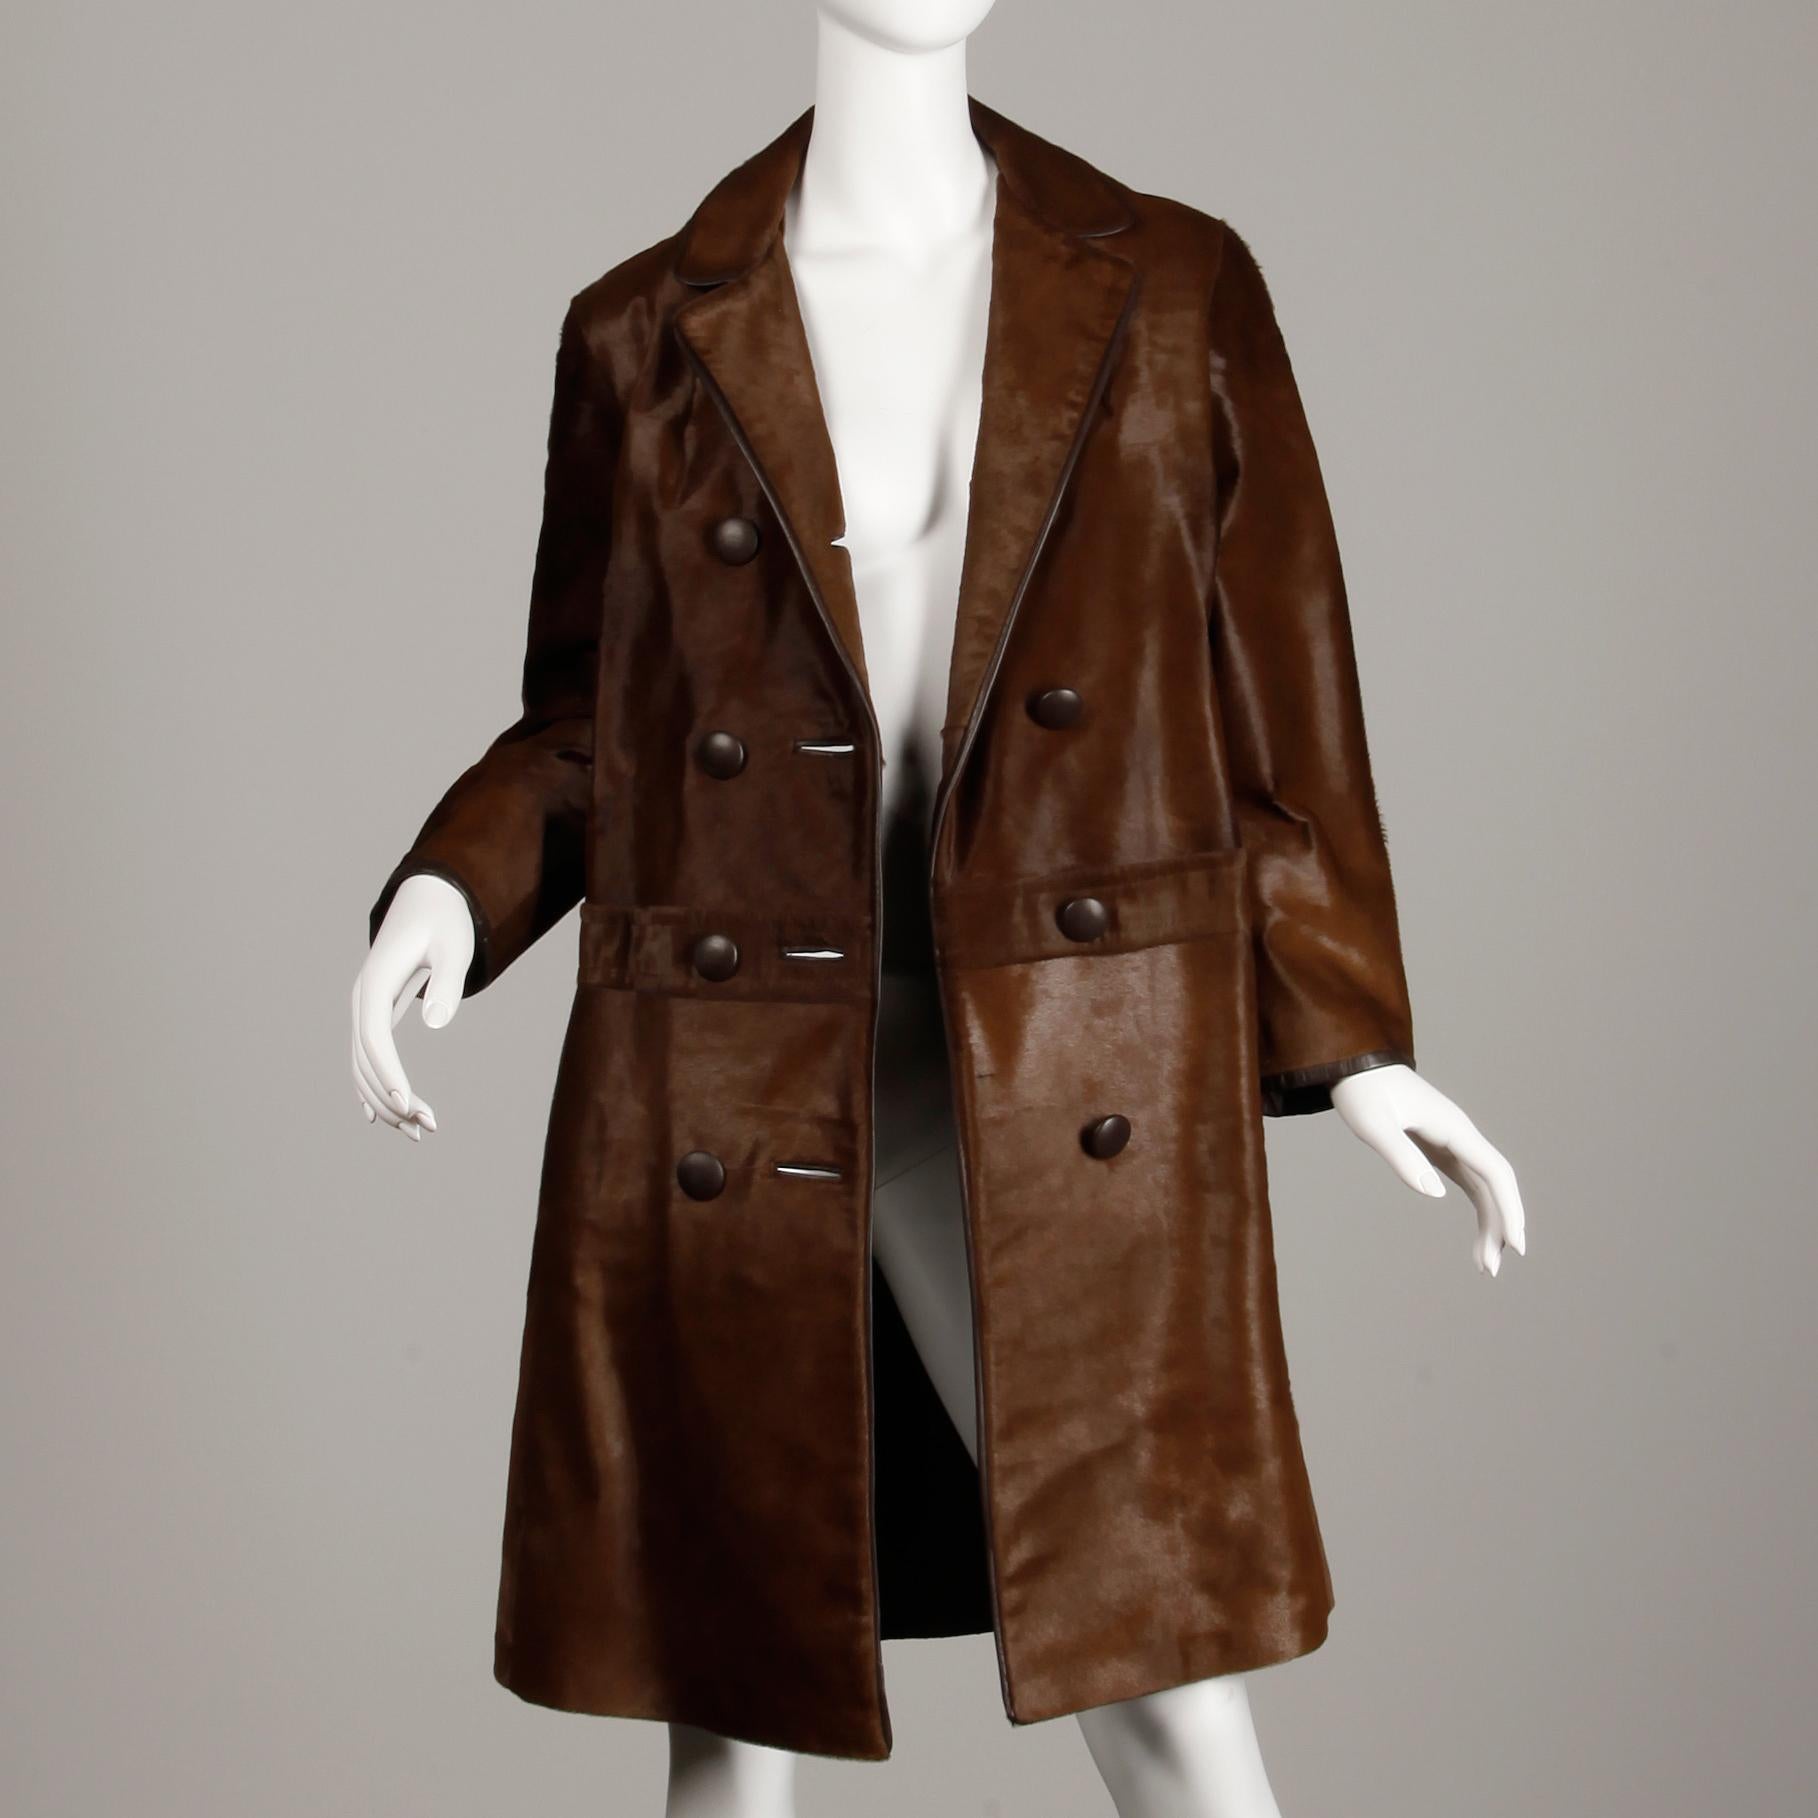 Stunning 1960s Vintage Pony Hair or Cowhide Brown Fur Coat with Leather Trim In Excellent Condition For Sale In Sparks, NV